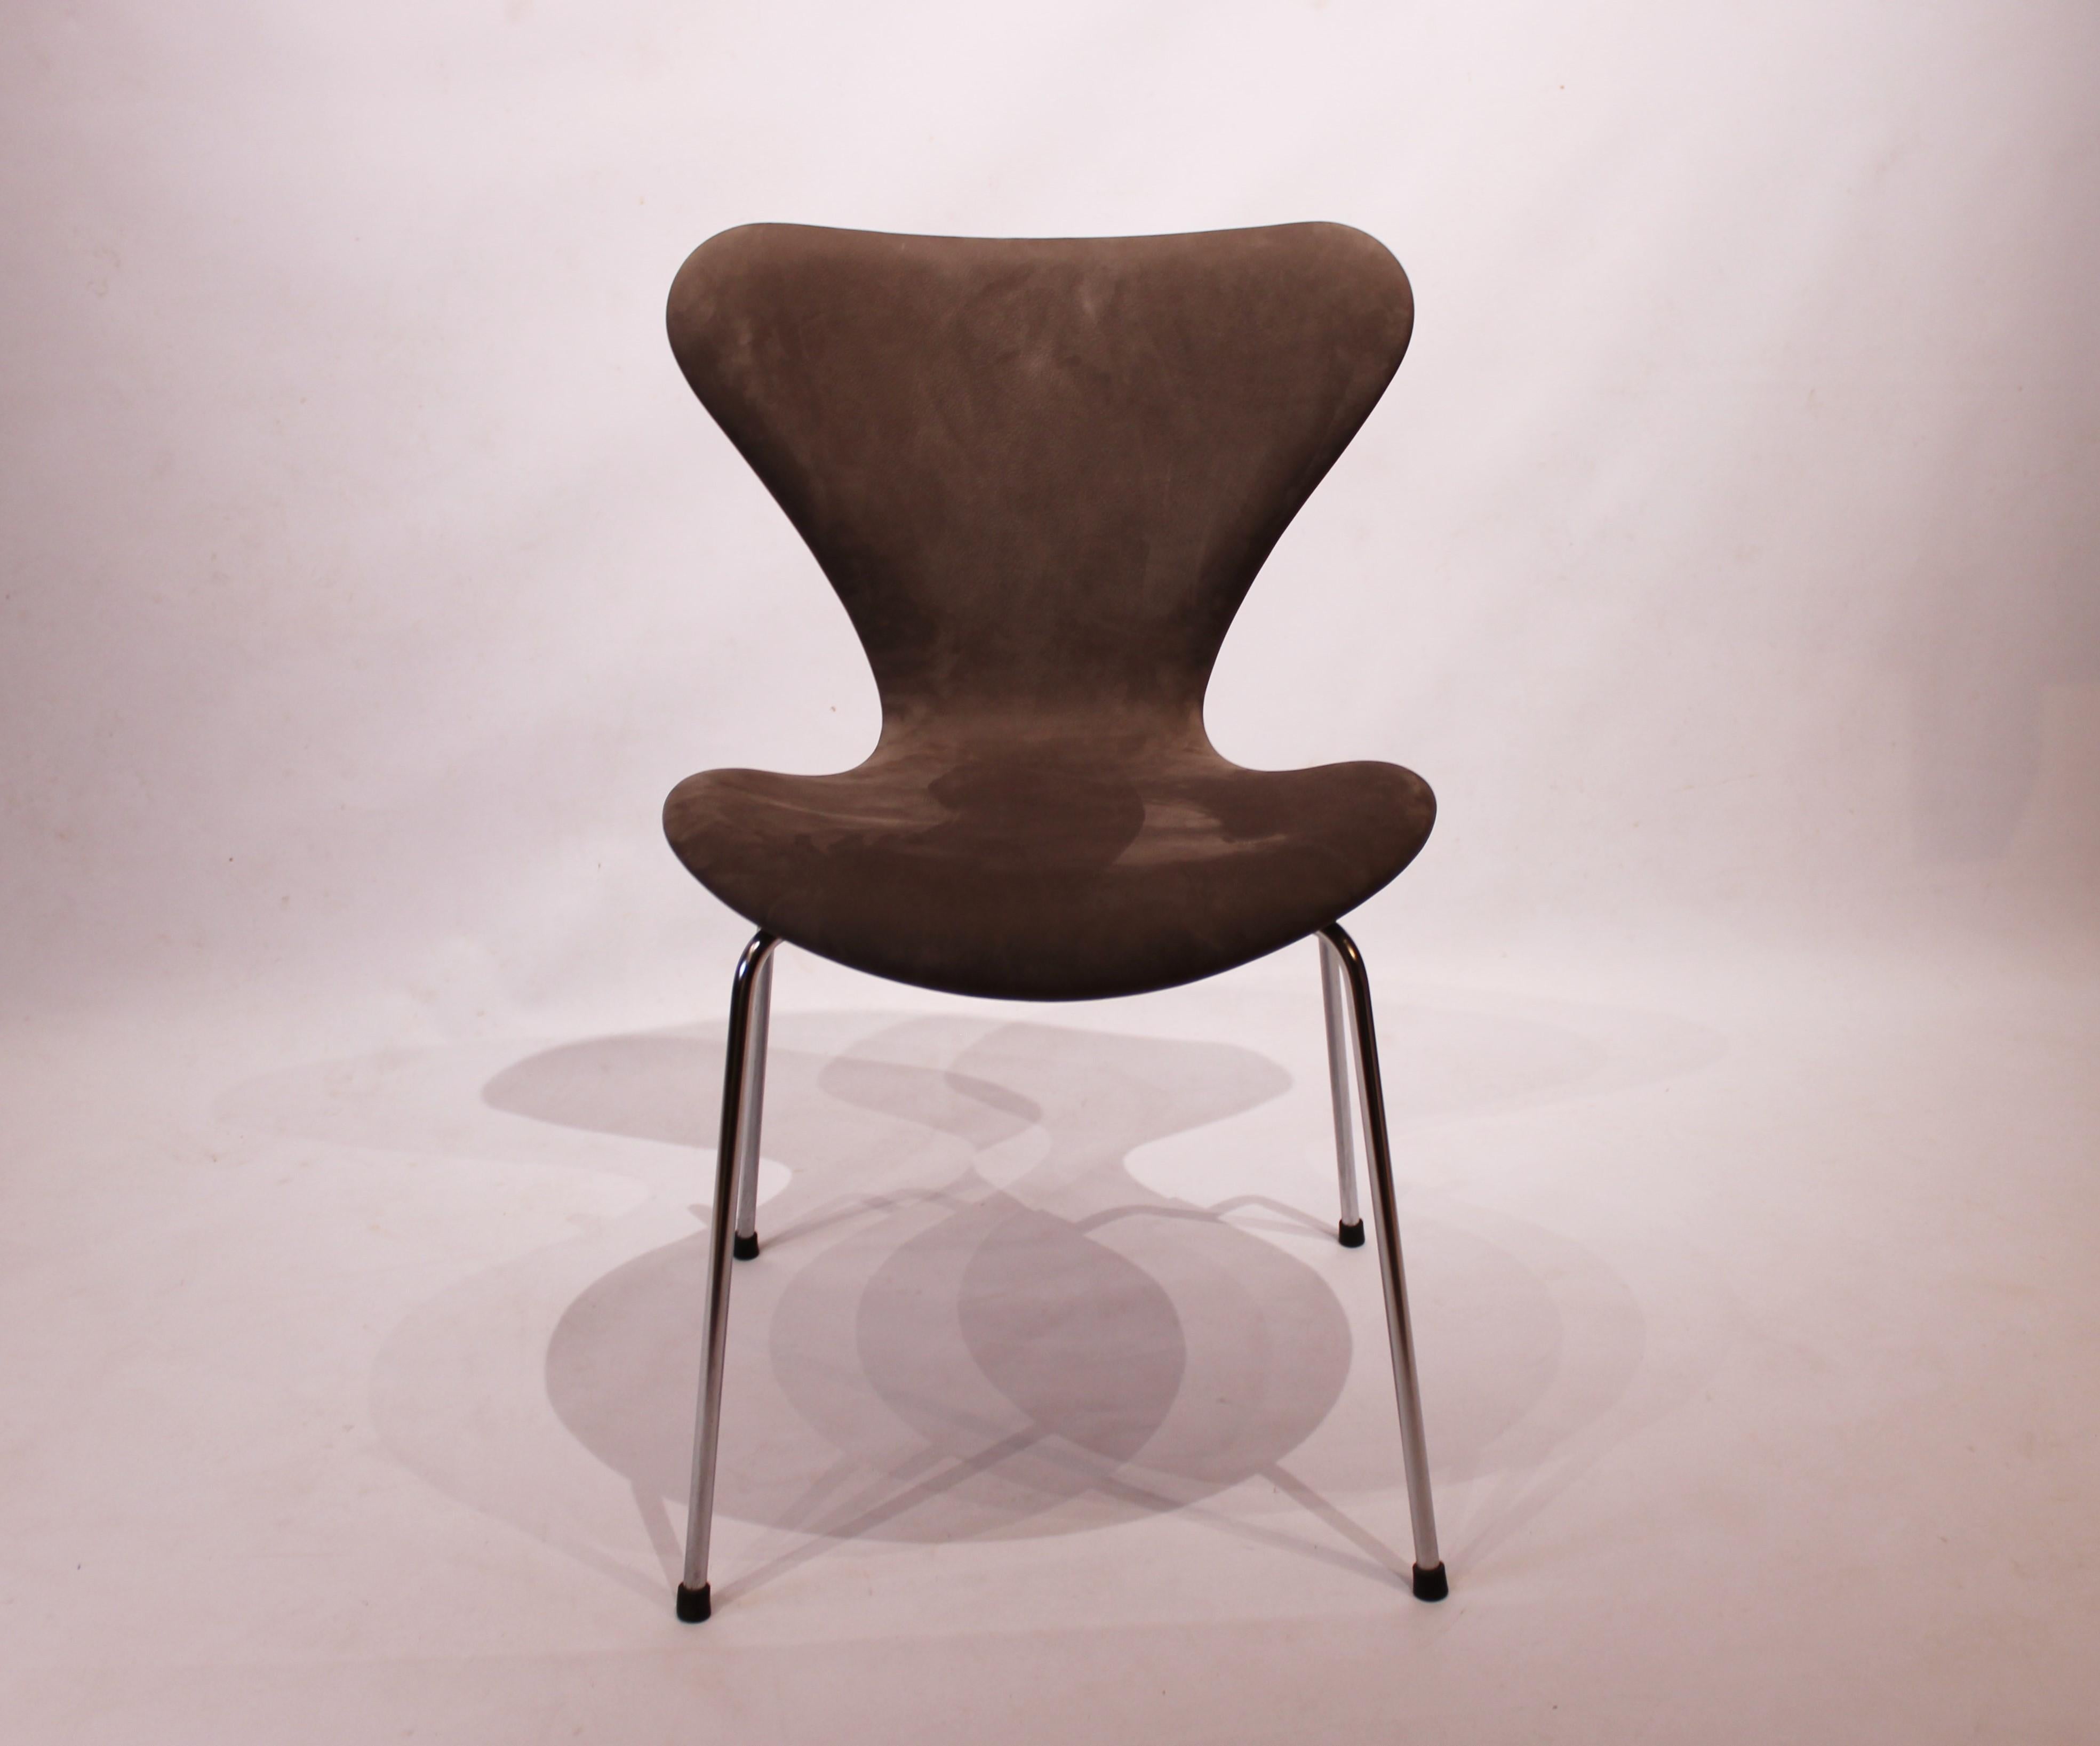 A set of 6 Seven chairs, model 3107, designed by Arne Jacobsen and manufactured by Fritz Hansen in 1967. The chairs are originally upholstered with light brown nubuck leather.